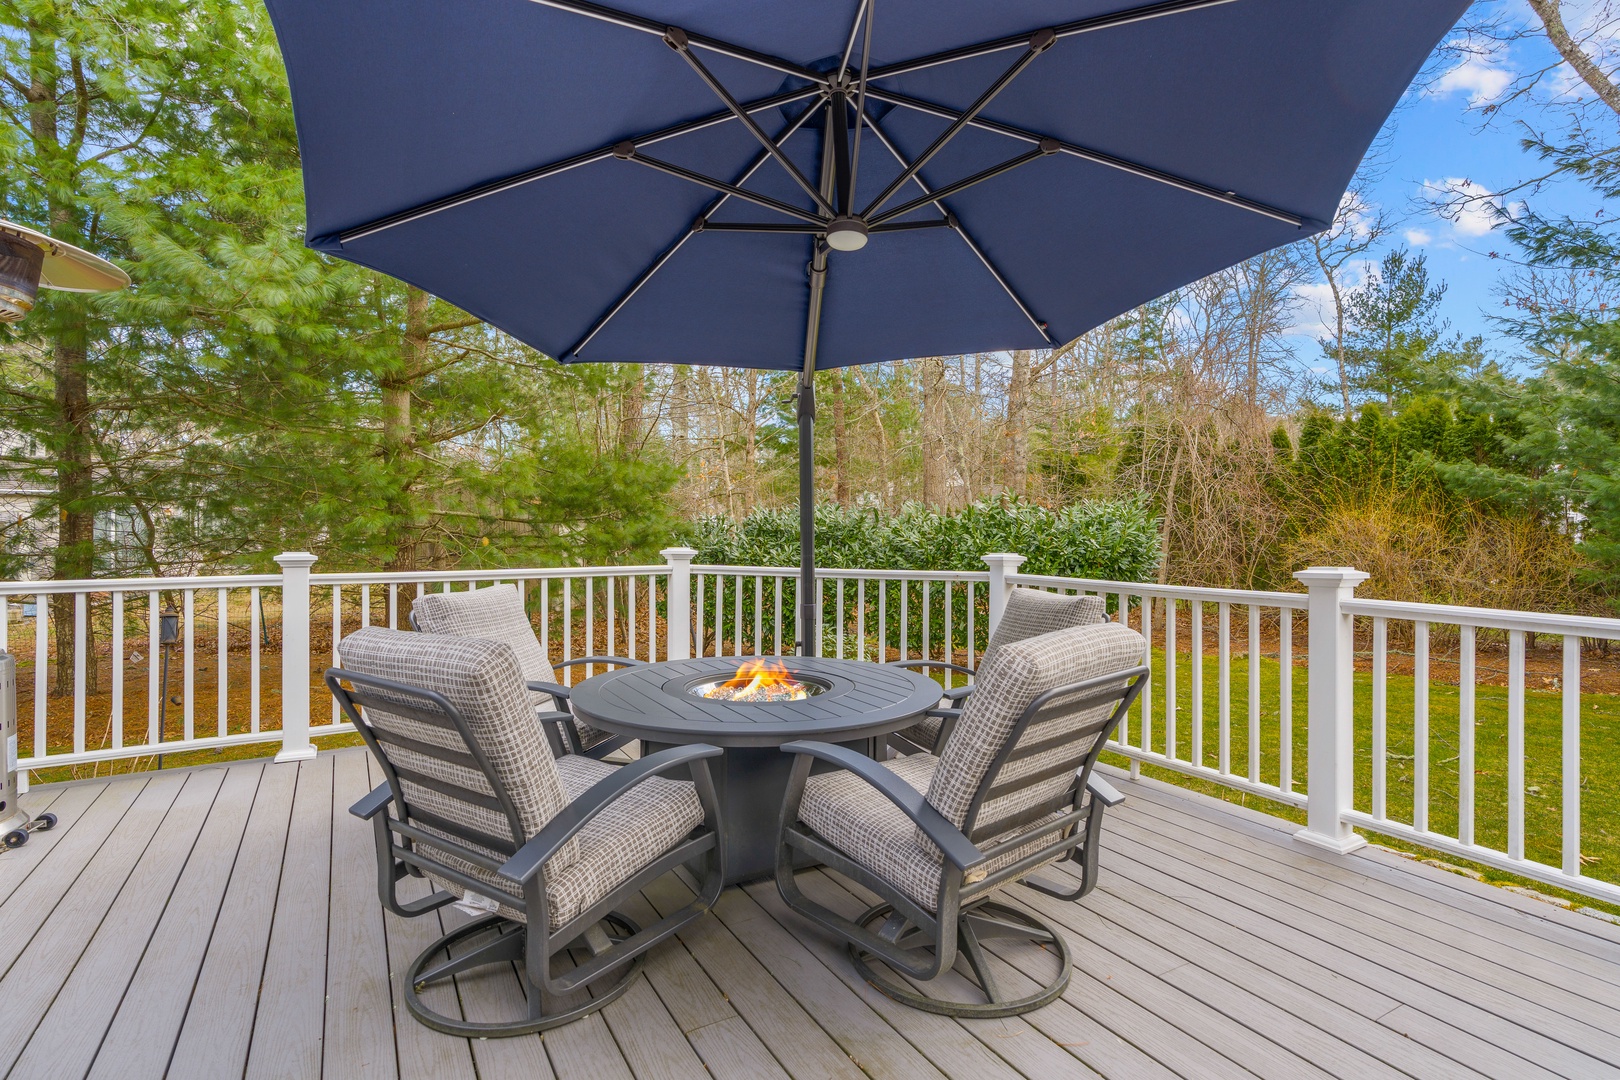 Savor the outdoors in style with a deck designed for relaxation, and unforgettable moments